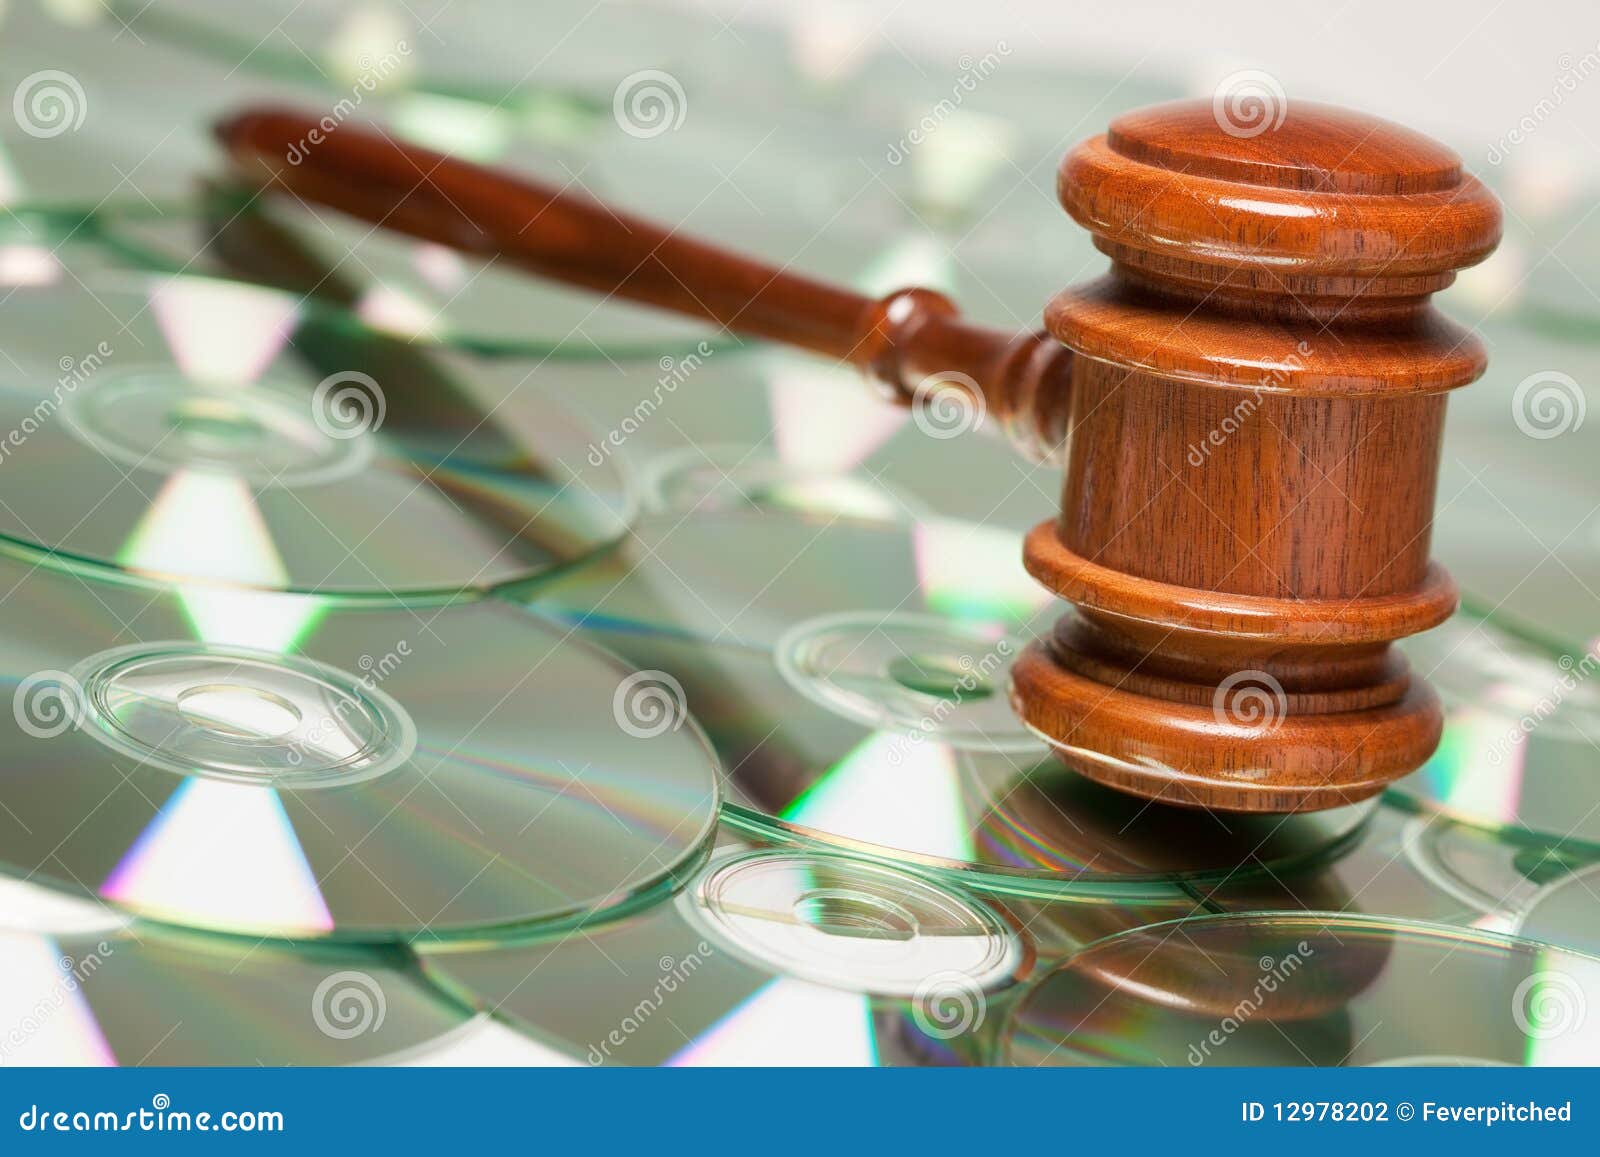 cd rom or dvd discs and gavel